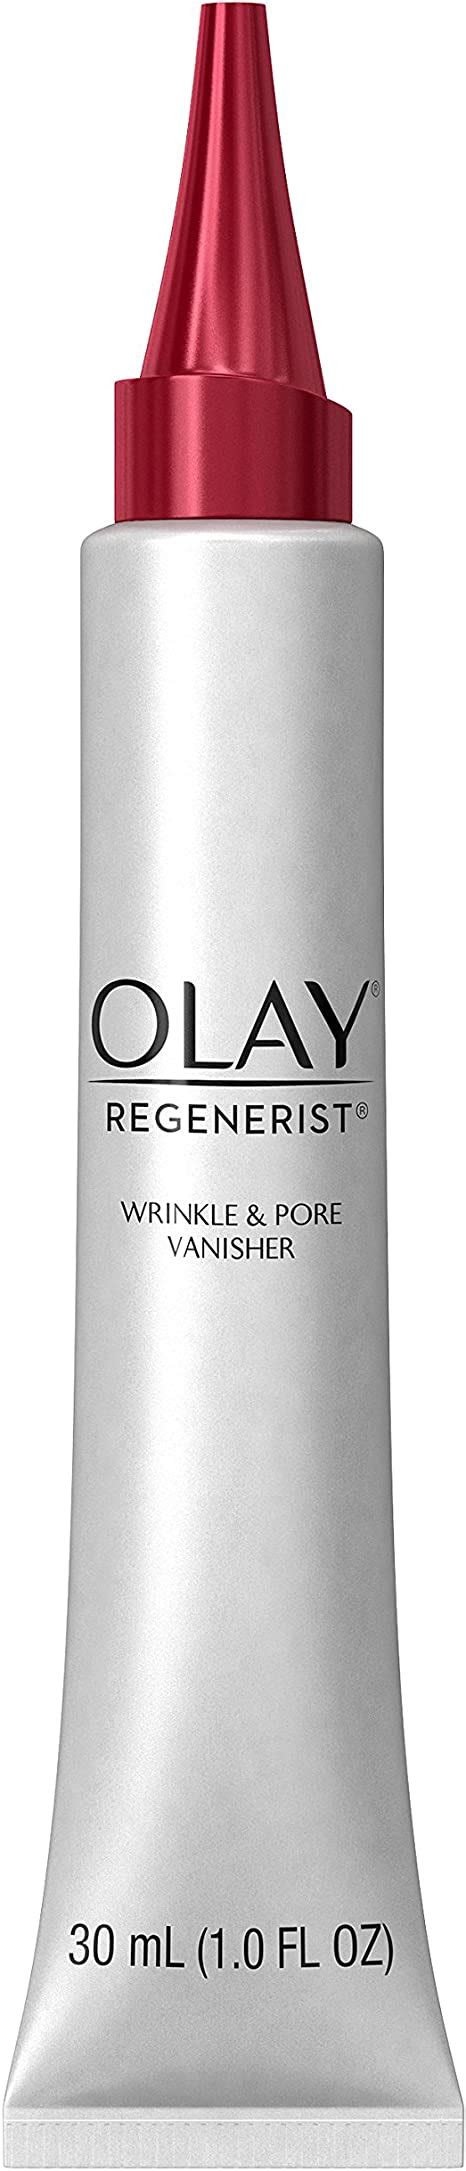 Wrinkle Cream By Olay Regenerist Instant Fix Wrinkle And Pore Vanisher 1